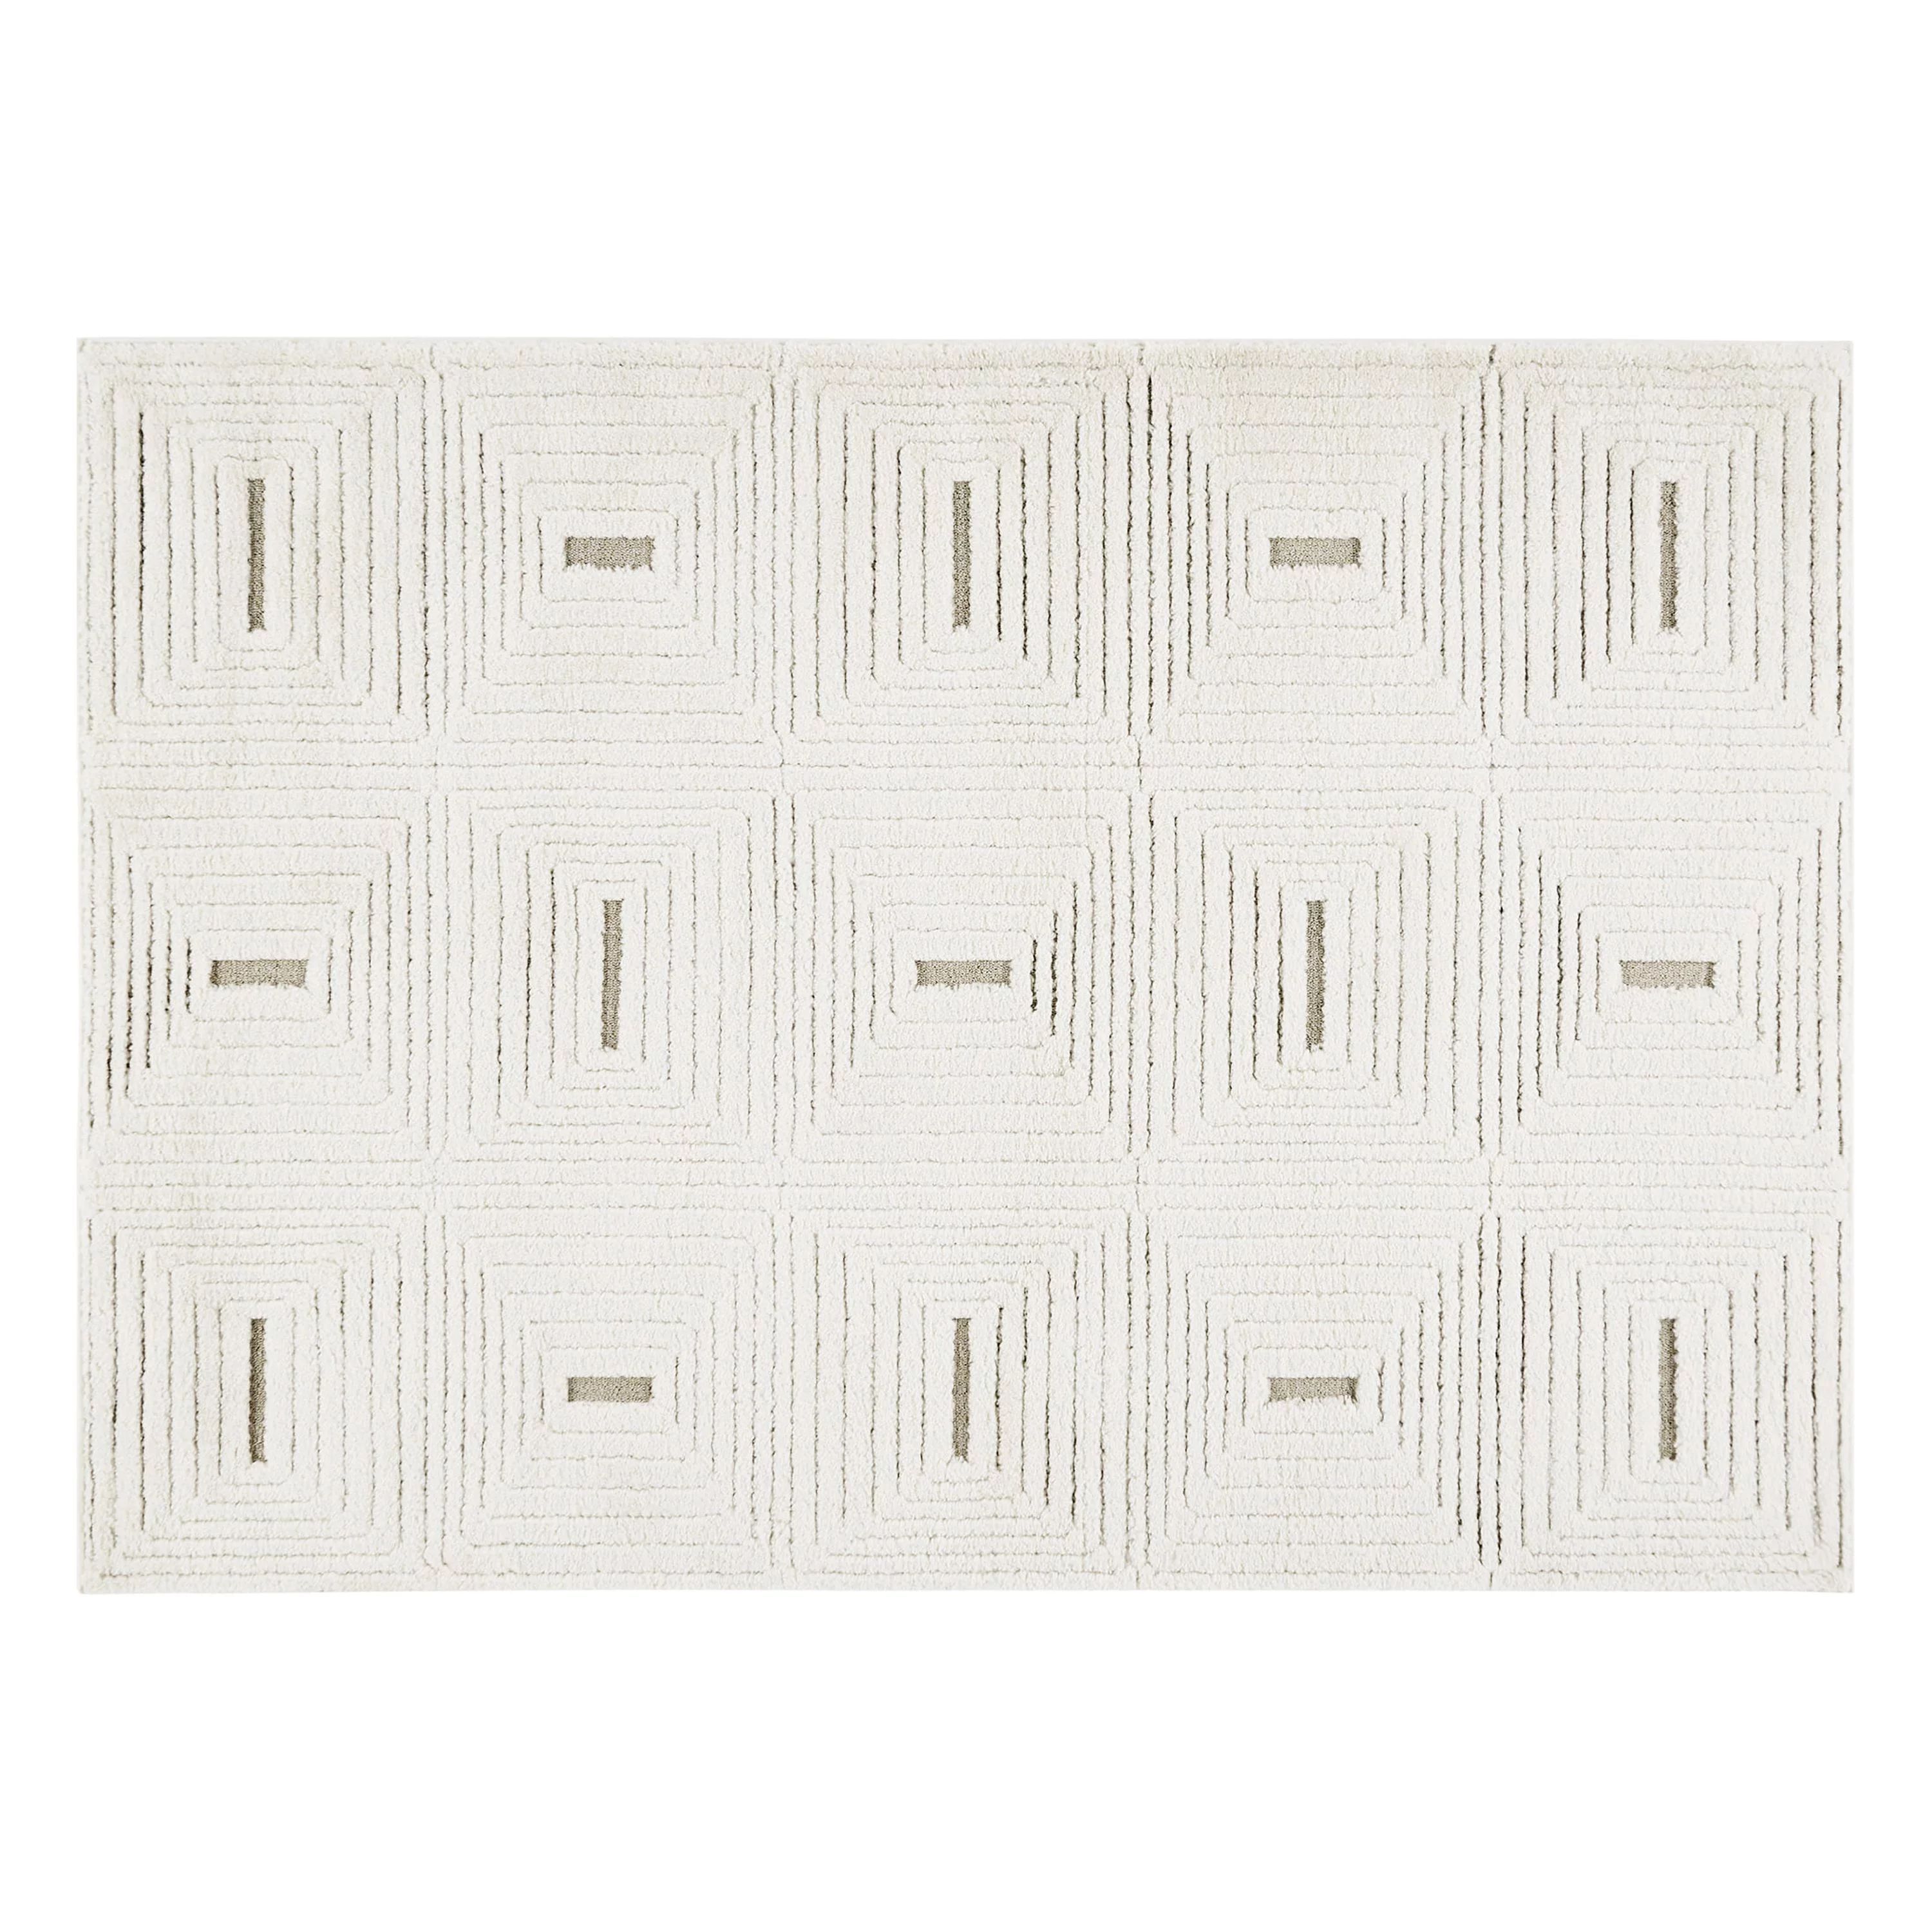 Better Homes Gardens Squares Rug, 5' x 7' by Dave & Jenny Marrs | Walmart (US)